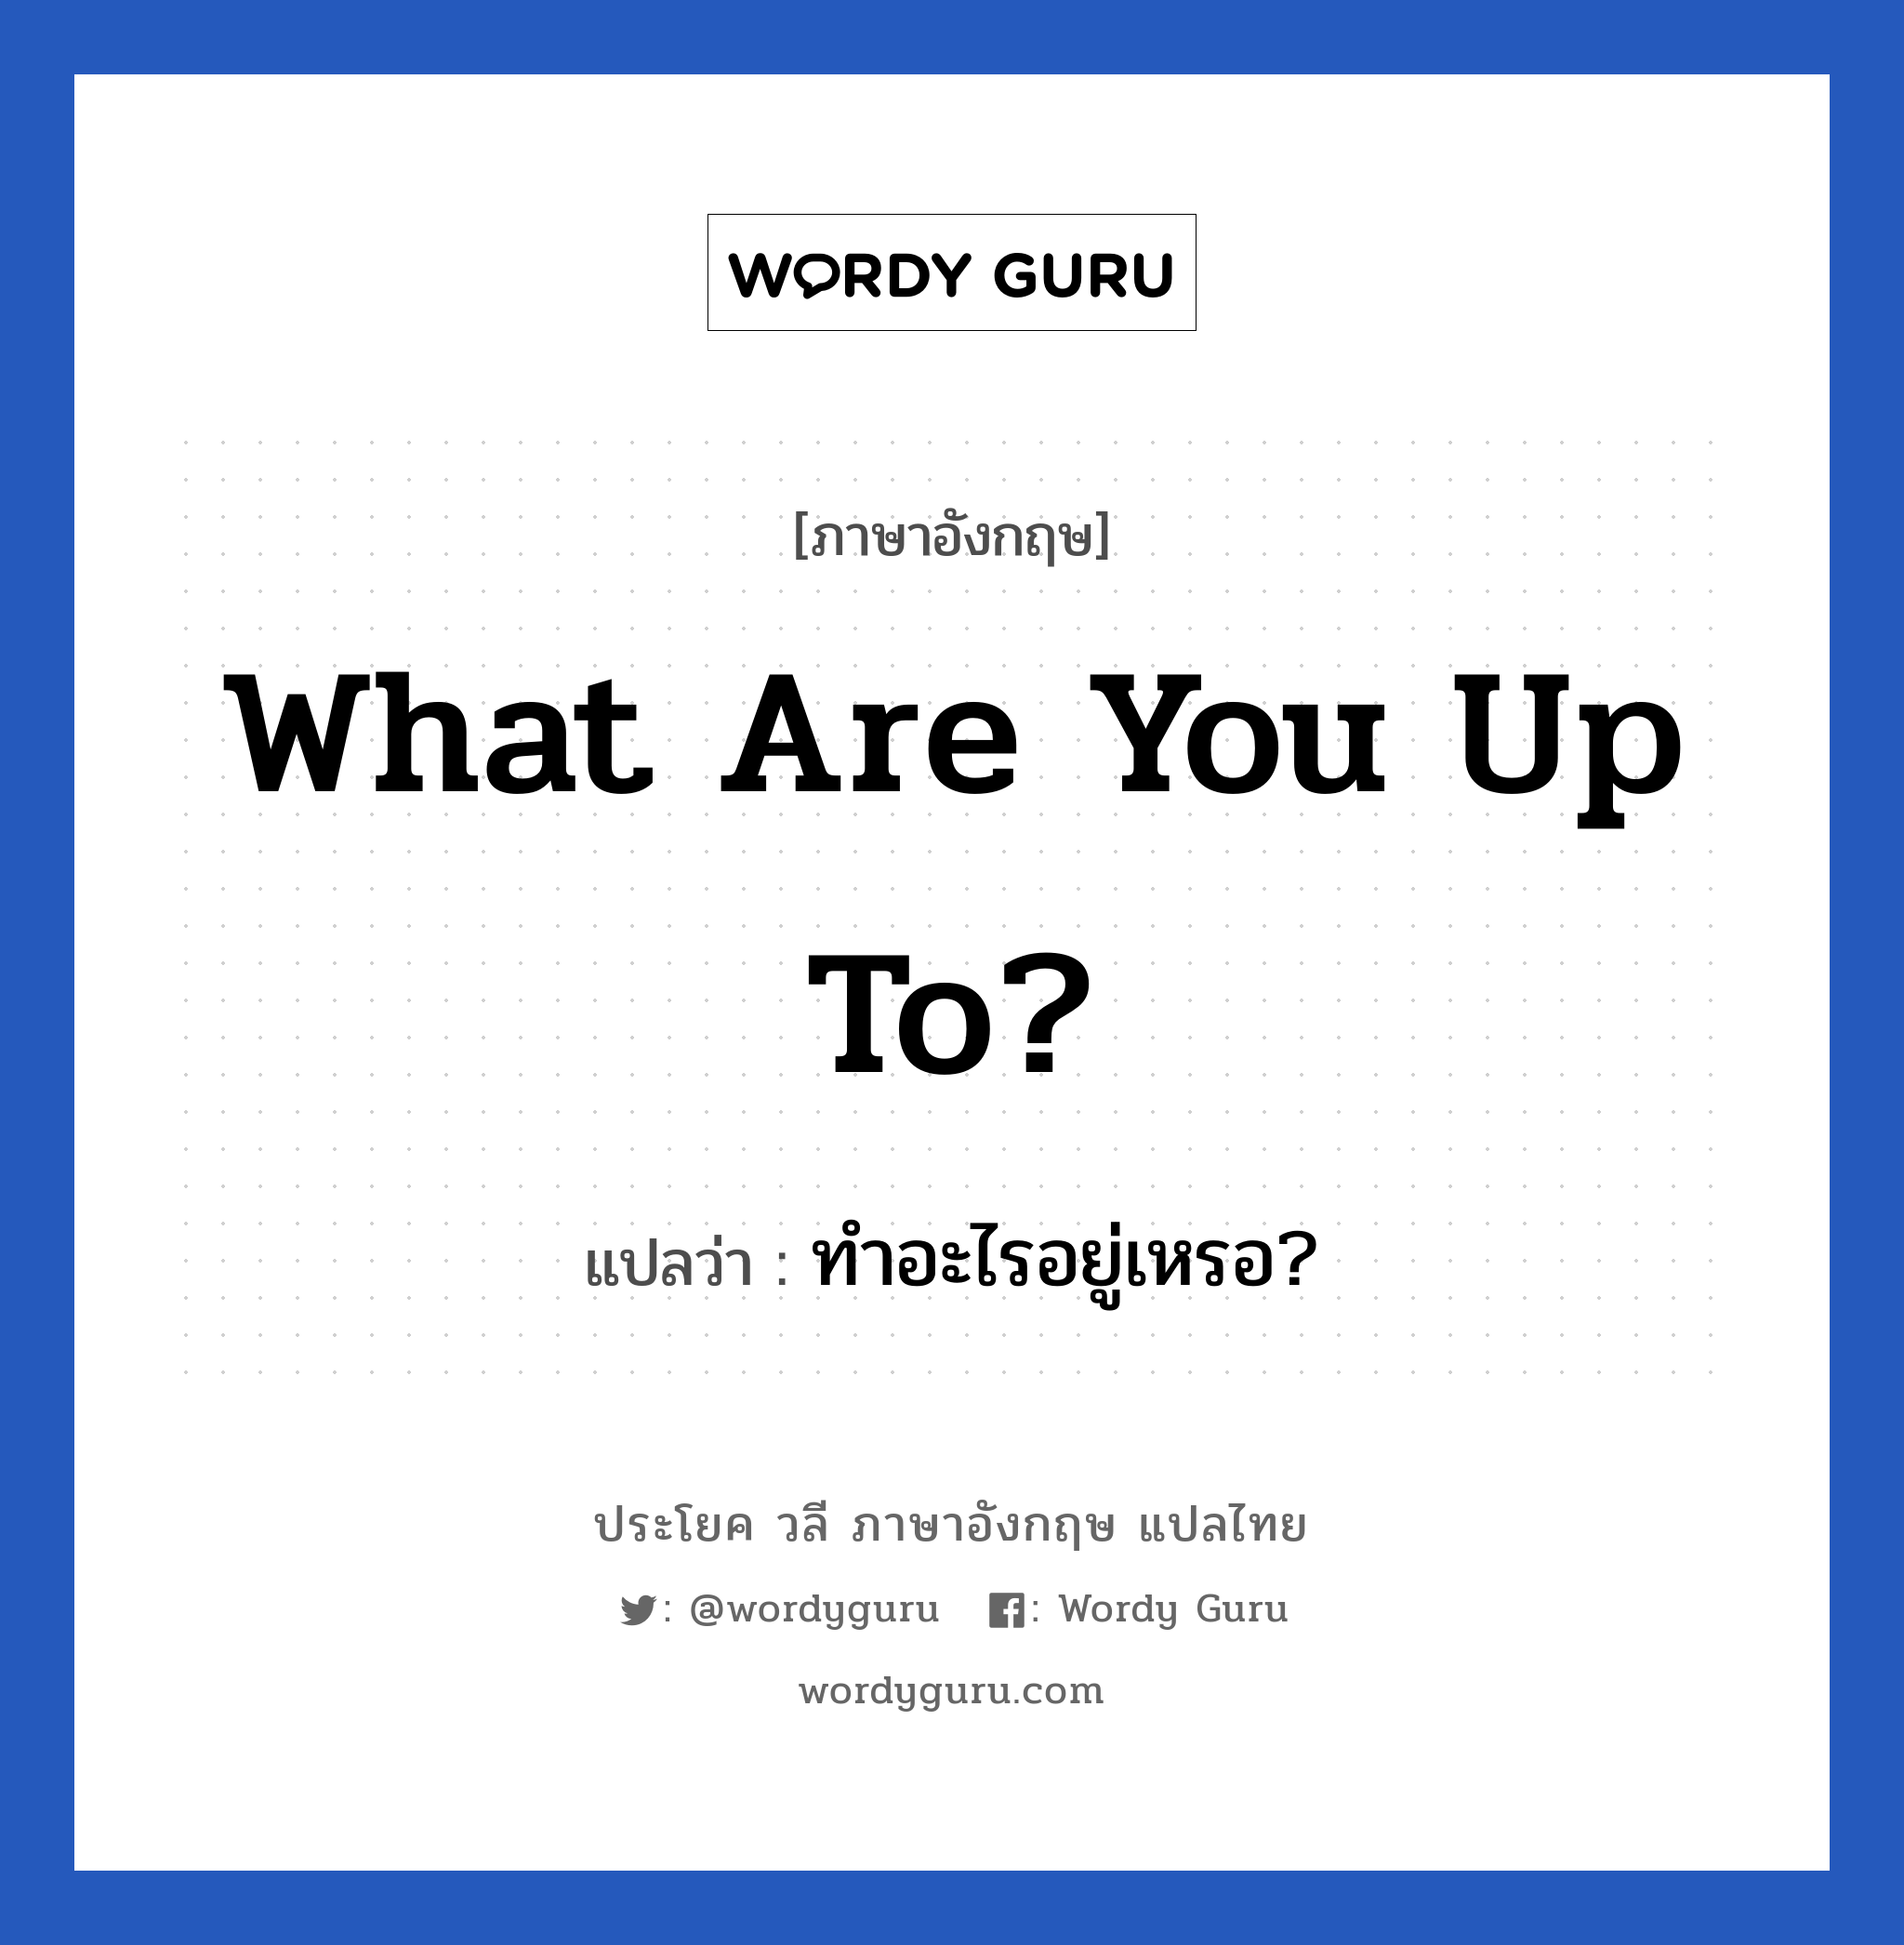 What are you up to? แปลว่า?, วลีภาษาอังกฤษ What are you up to? แปลว่า ทำอะไรอยู่เหรอ?